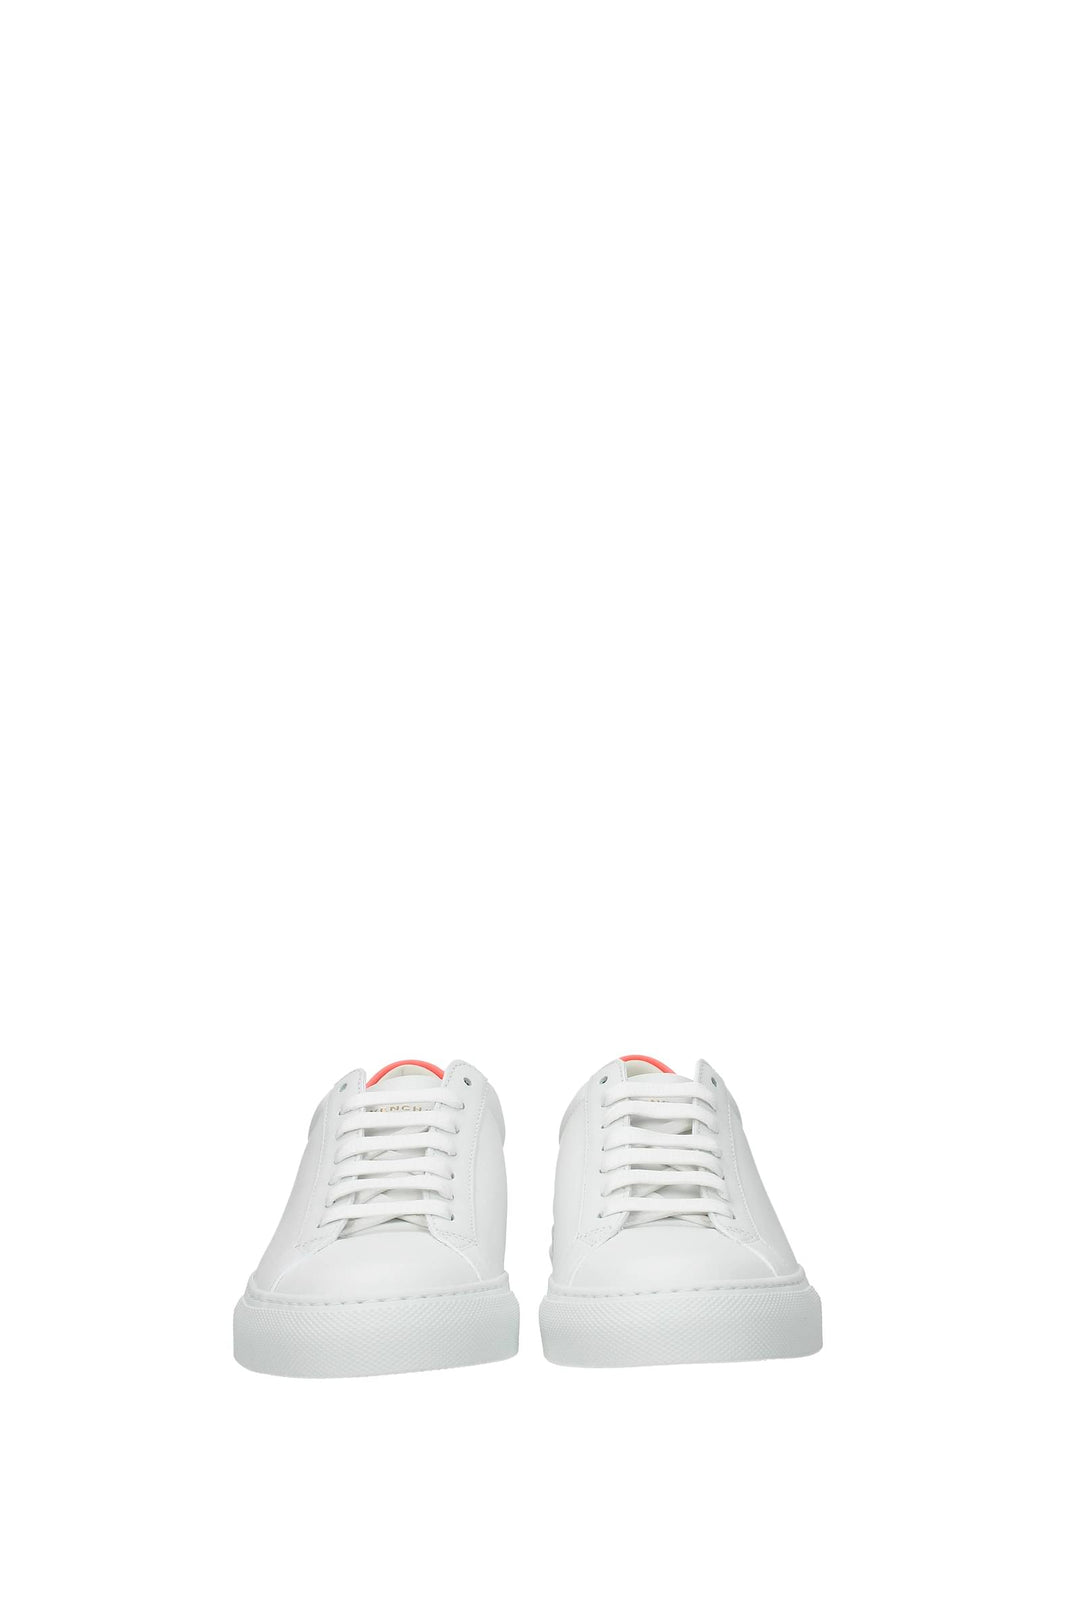 Sneakers Urban Street Pelle Bianco Rosa Neon - Givenchy - Donna